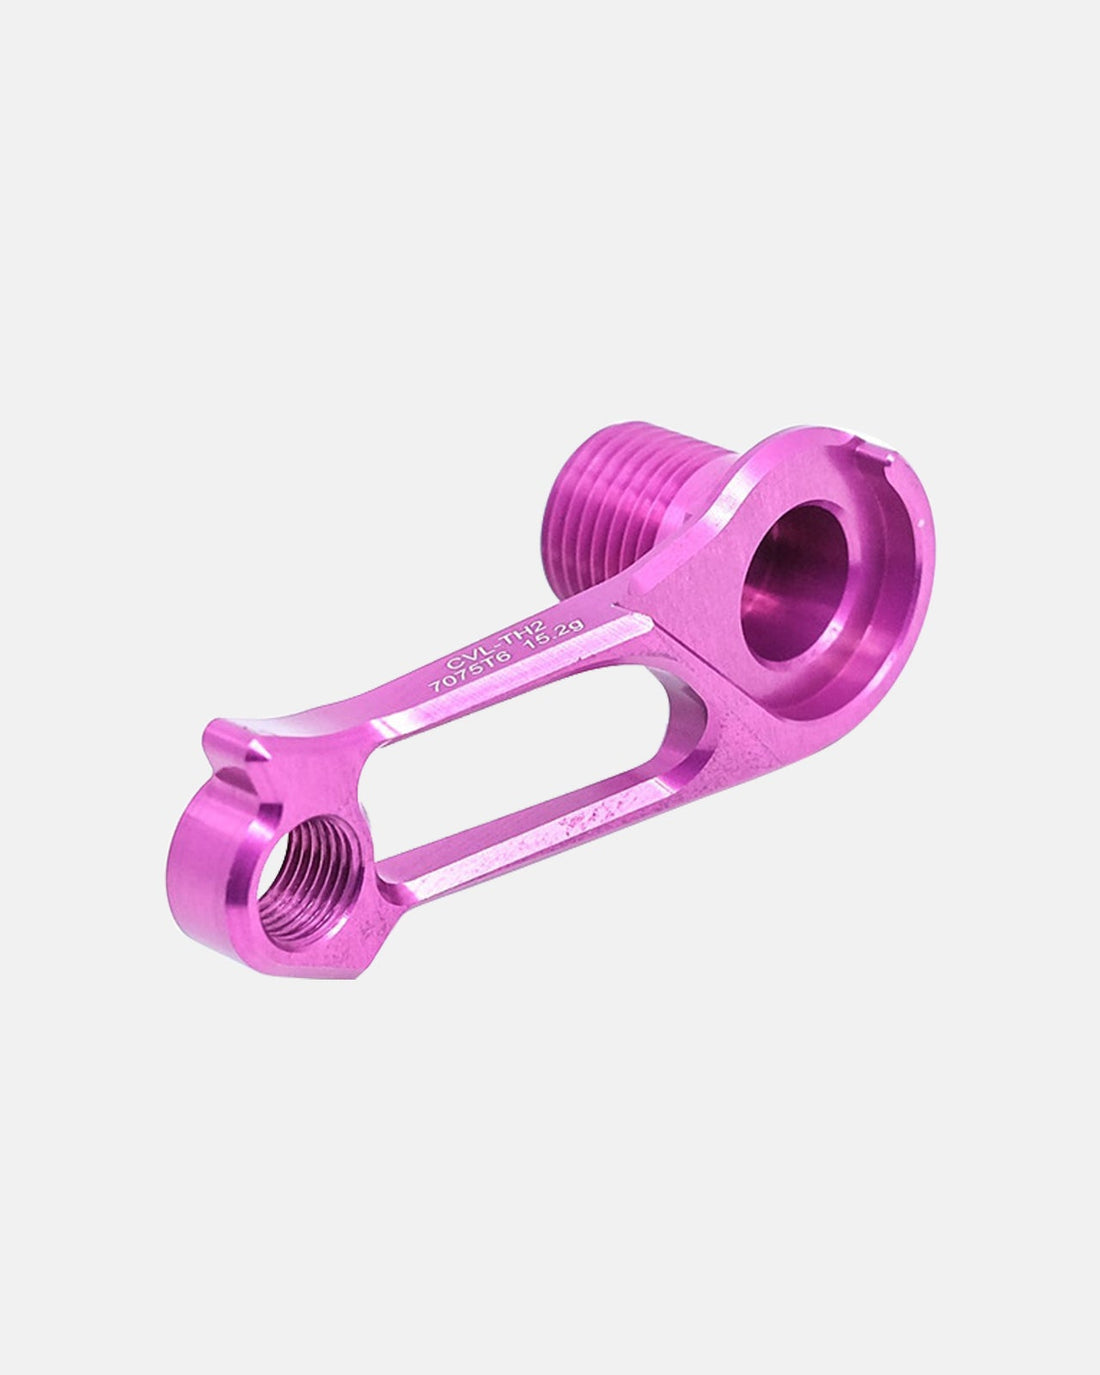 Sigeyi Cervelo Direct-Mount Disc Derailleur Hanger - Anodized Pink - Sigeyi